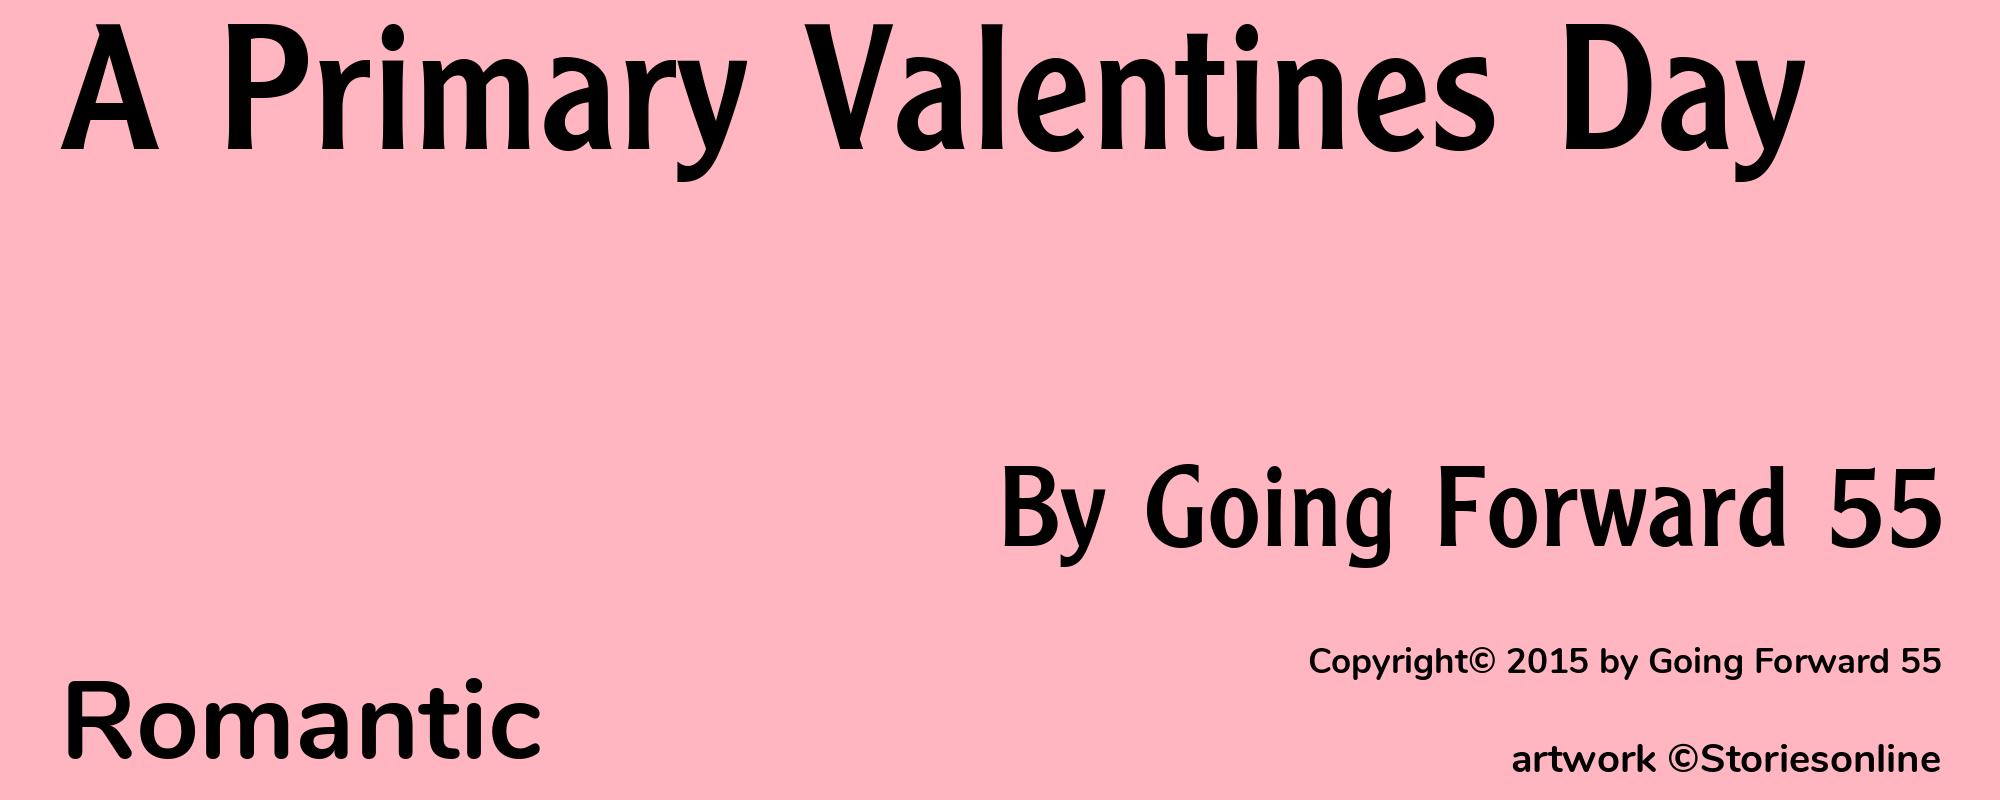 A Primary Valentines Day - Cover